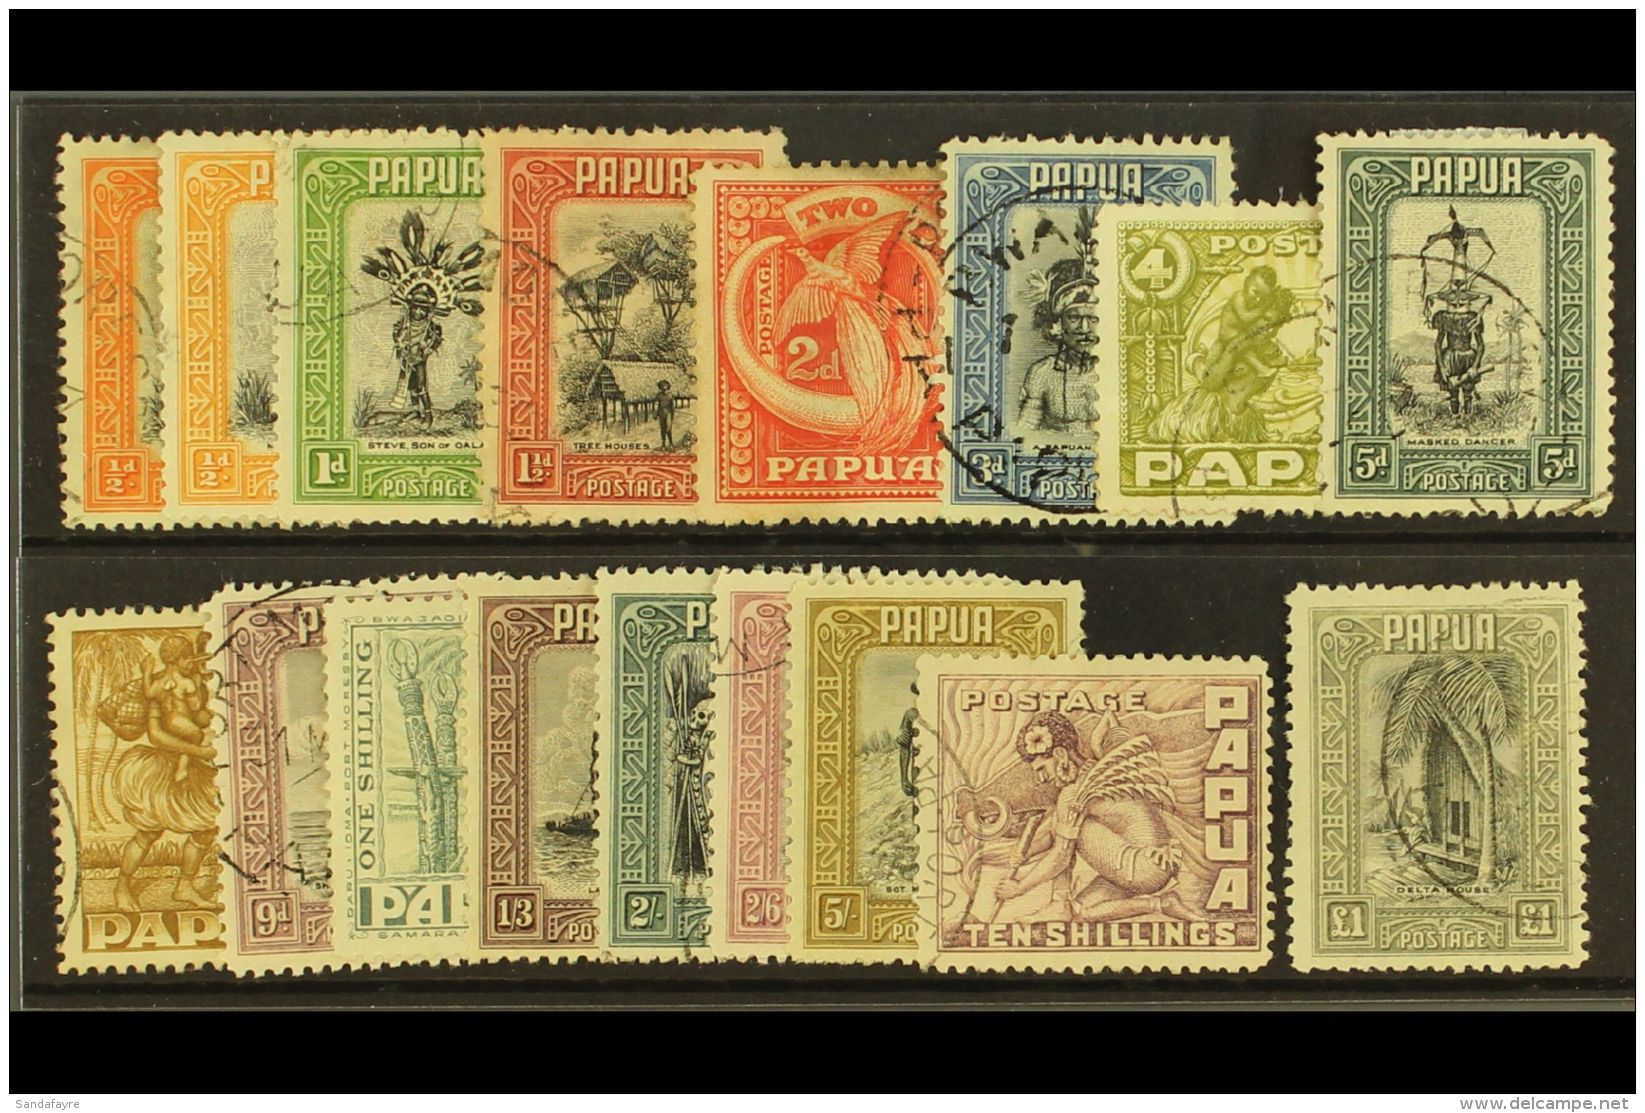 1932 Native Scenes Set Complete, SG 130/45, Very Fine And Fresh Used Incl &frac12;d Black And Buff Shade. (17... - Papua New Guinea